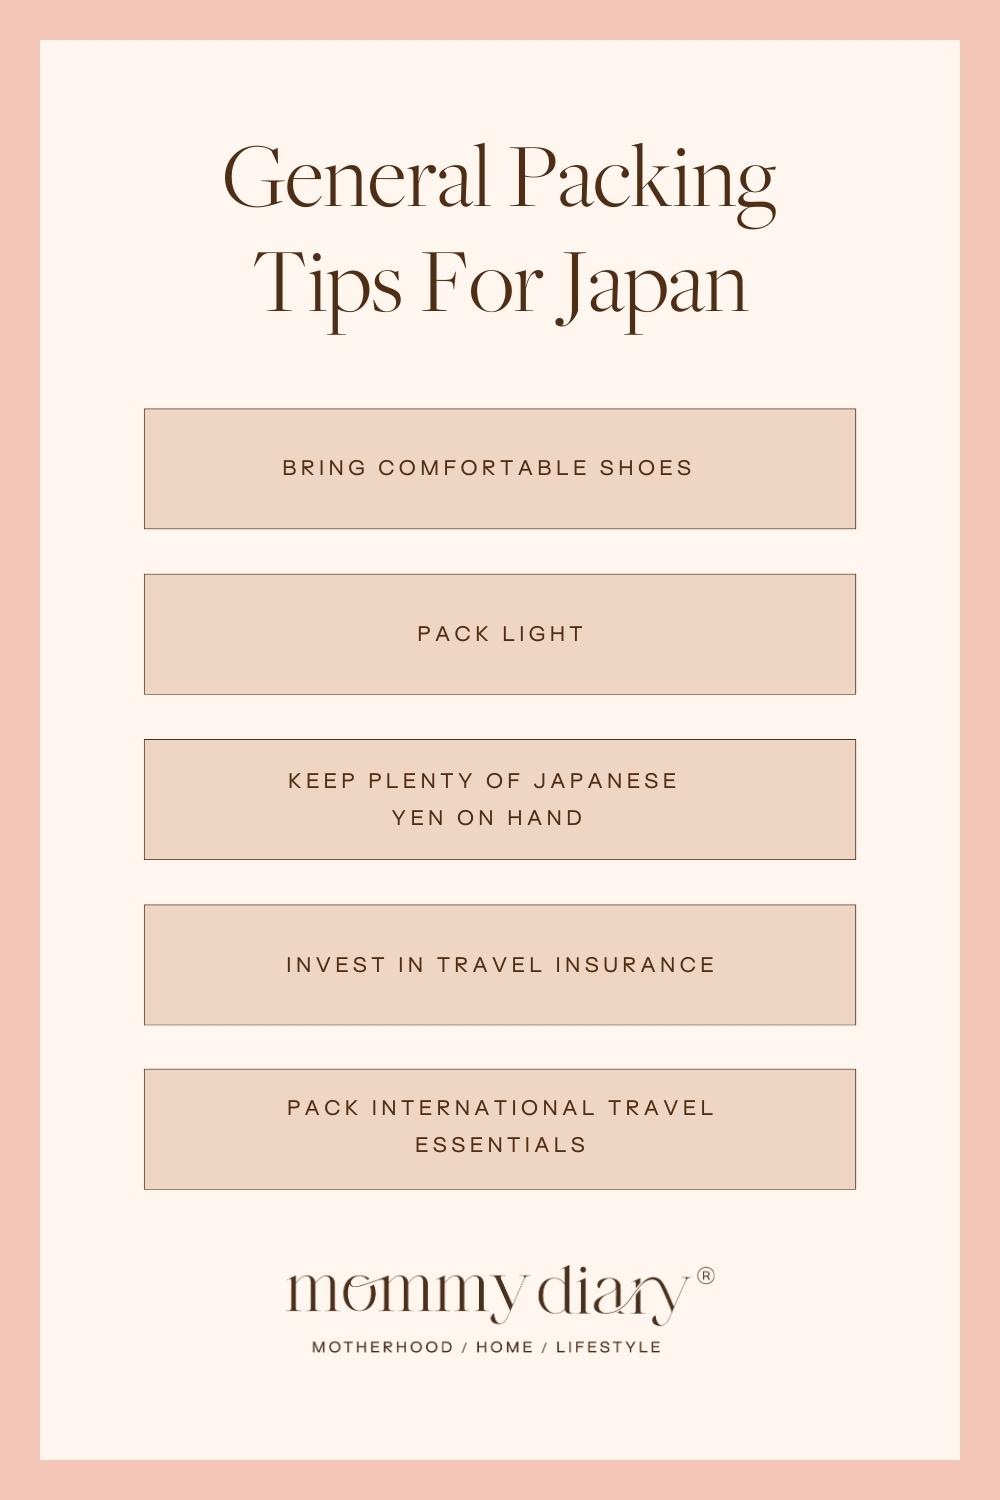 General Packing Tips For Japan